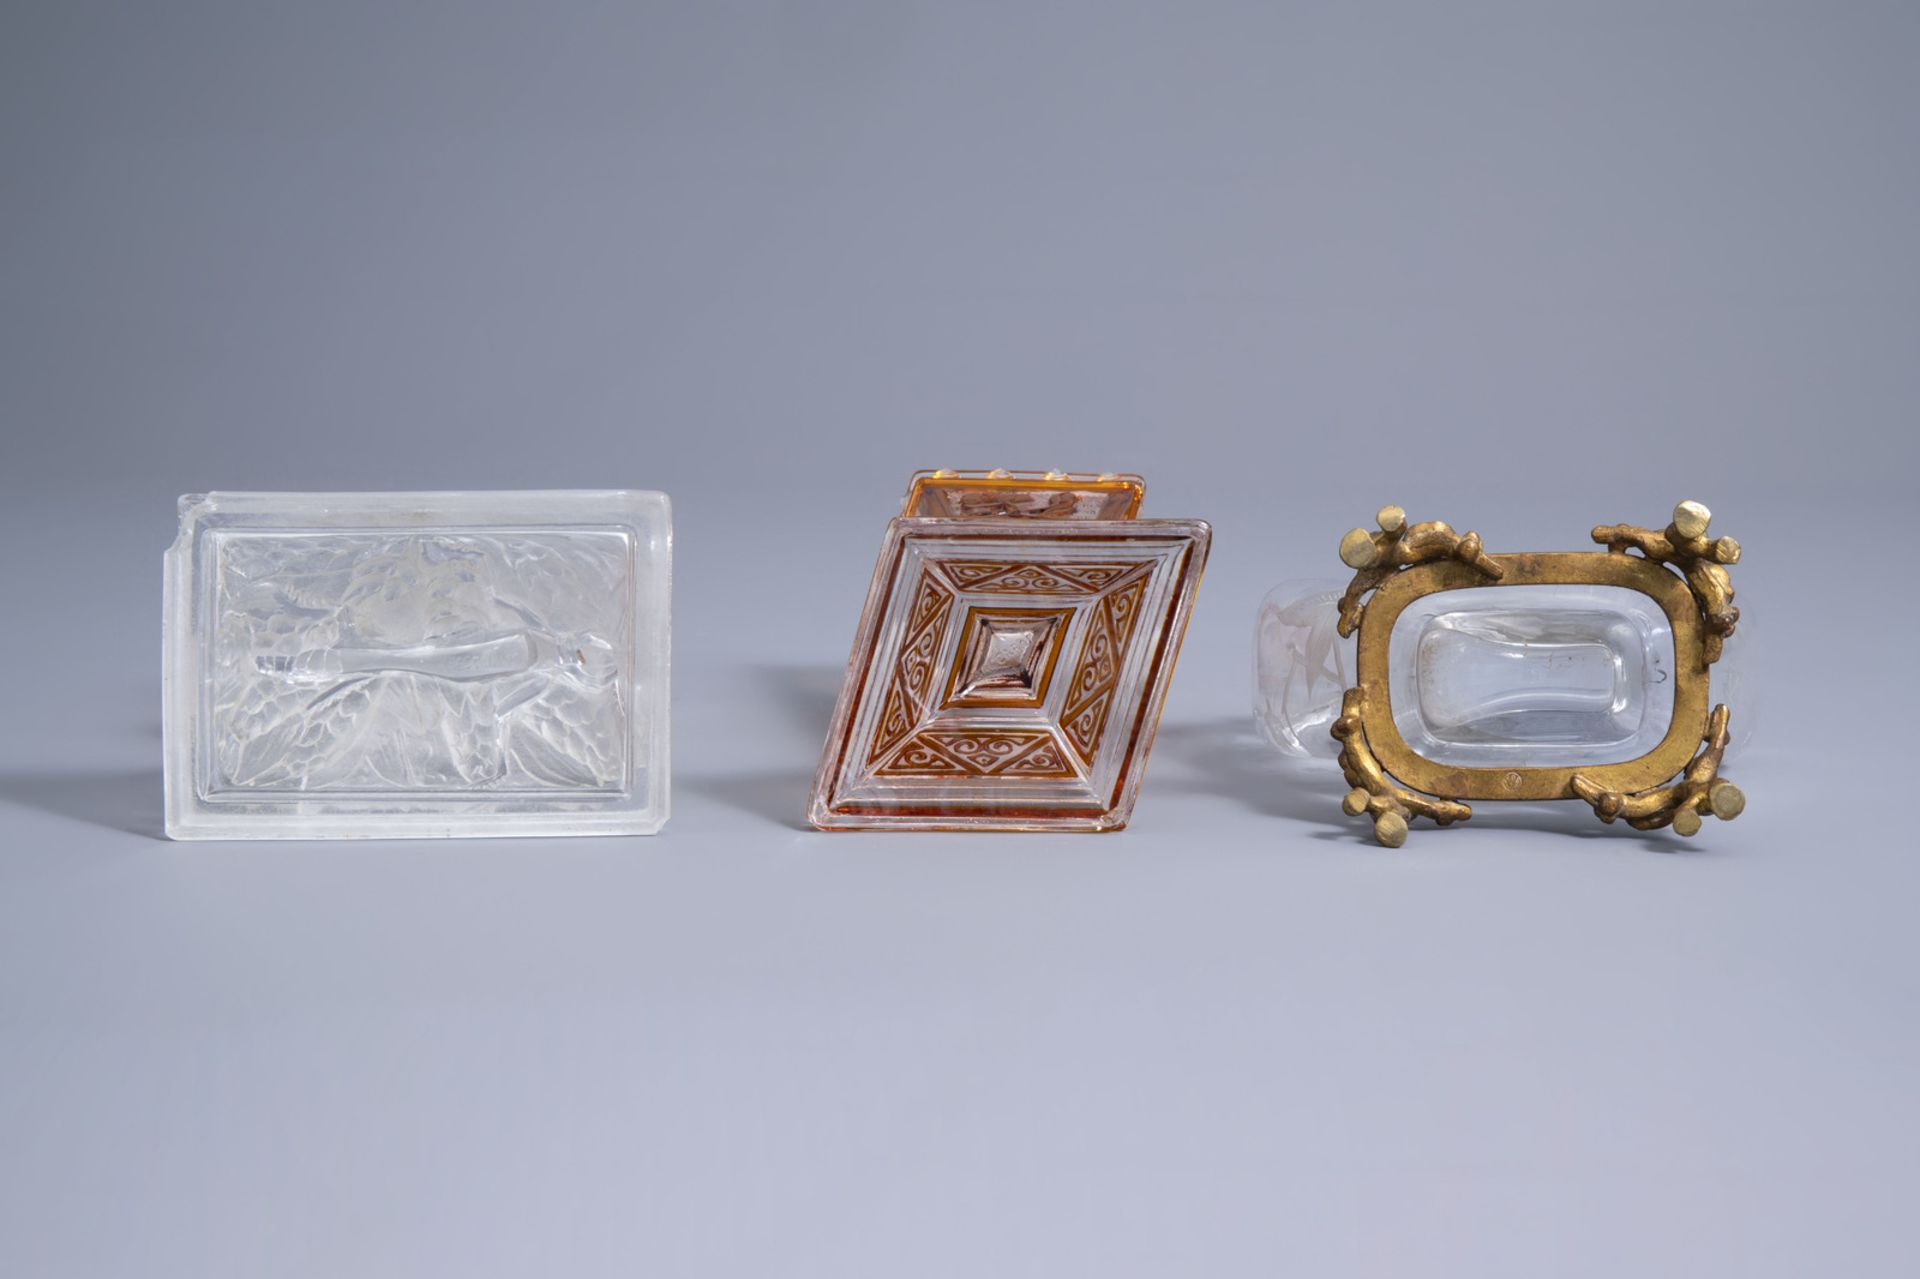 Three various French Baccarat glass vases with floral design, late 19th C. - Image 7 of 9